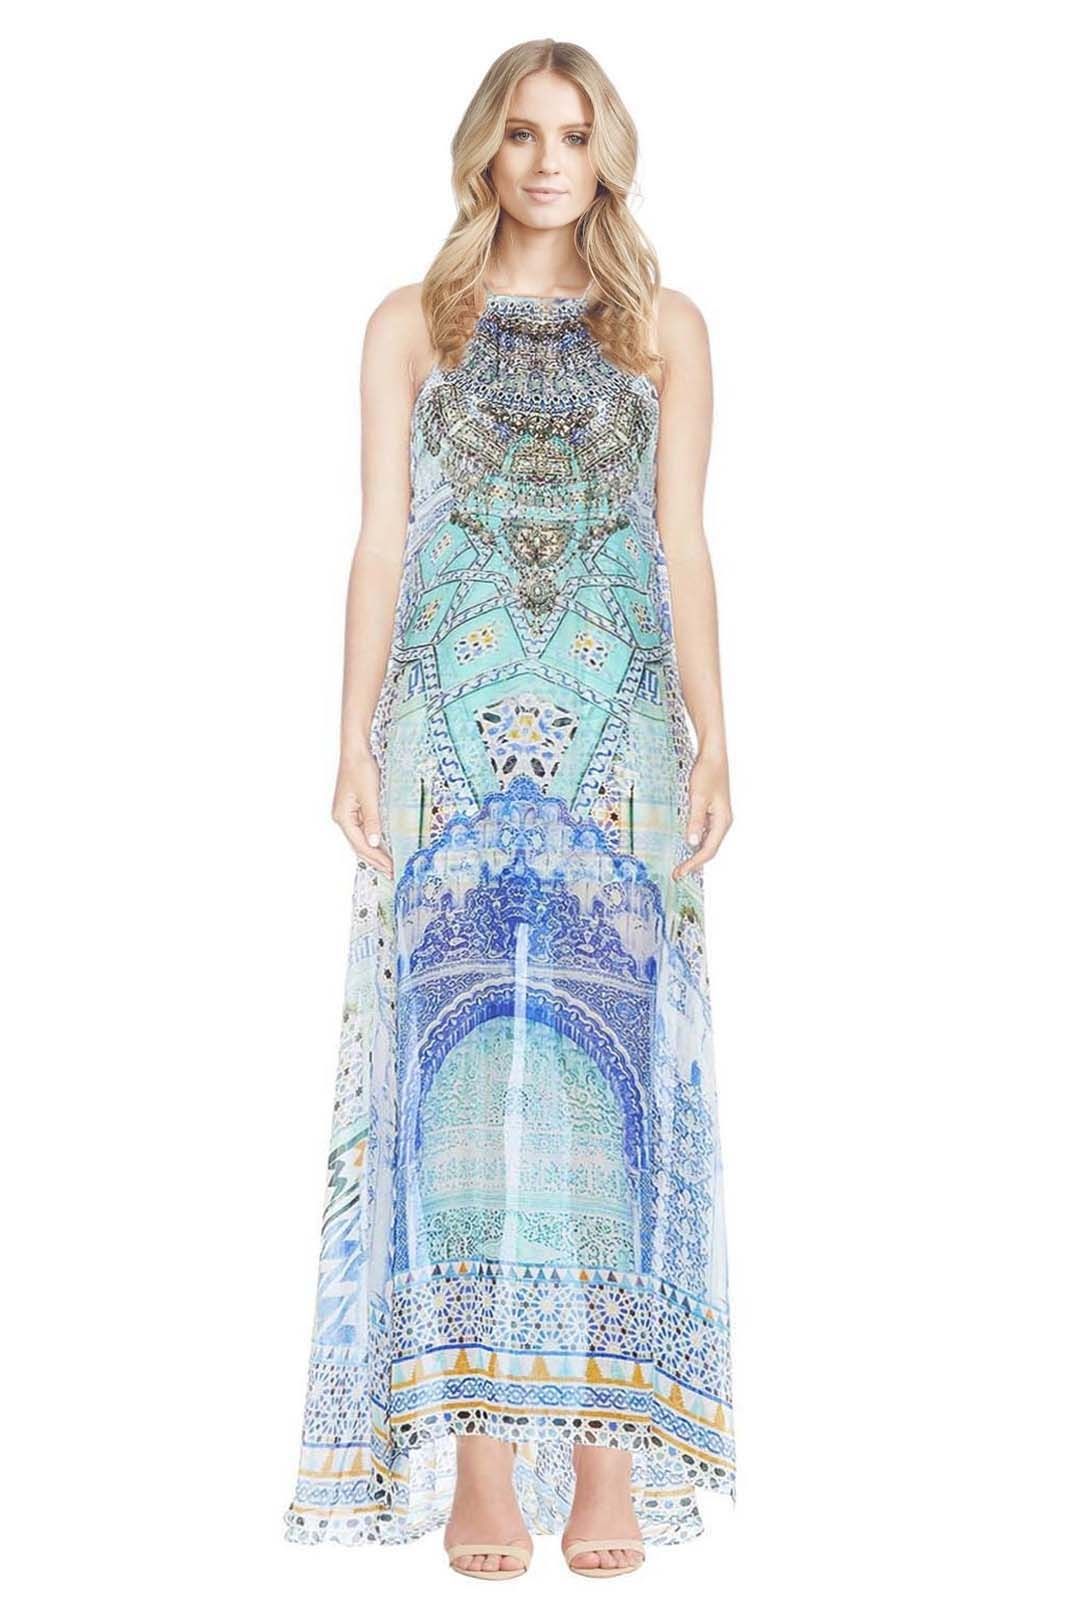 Camilla - Sultans Gate Sheery Overlay Dress - Prints - Front